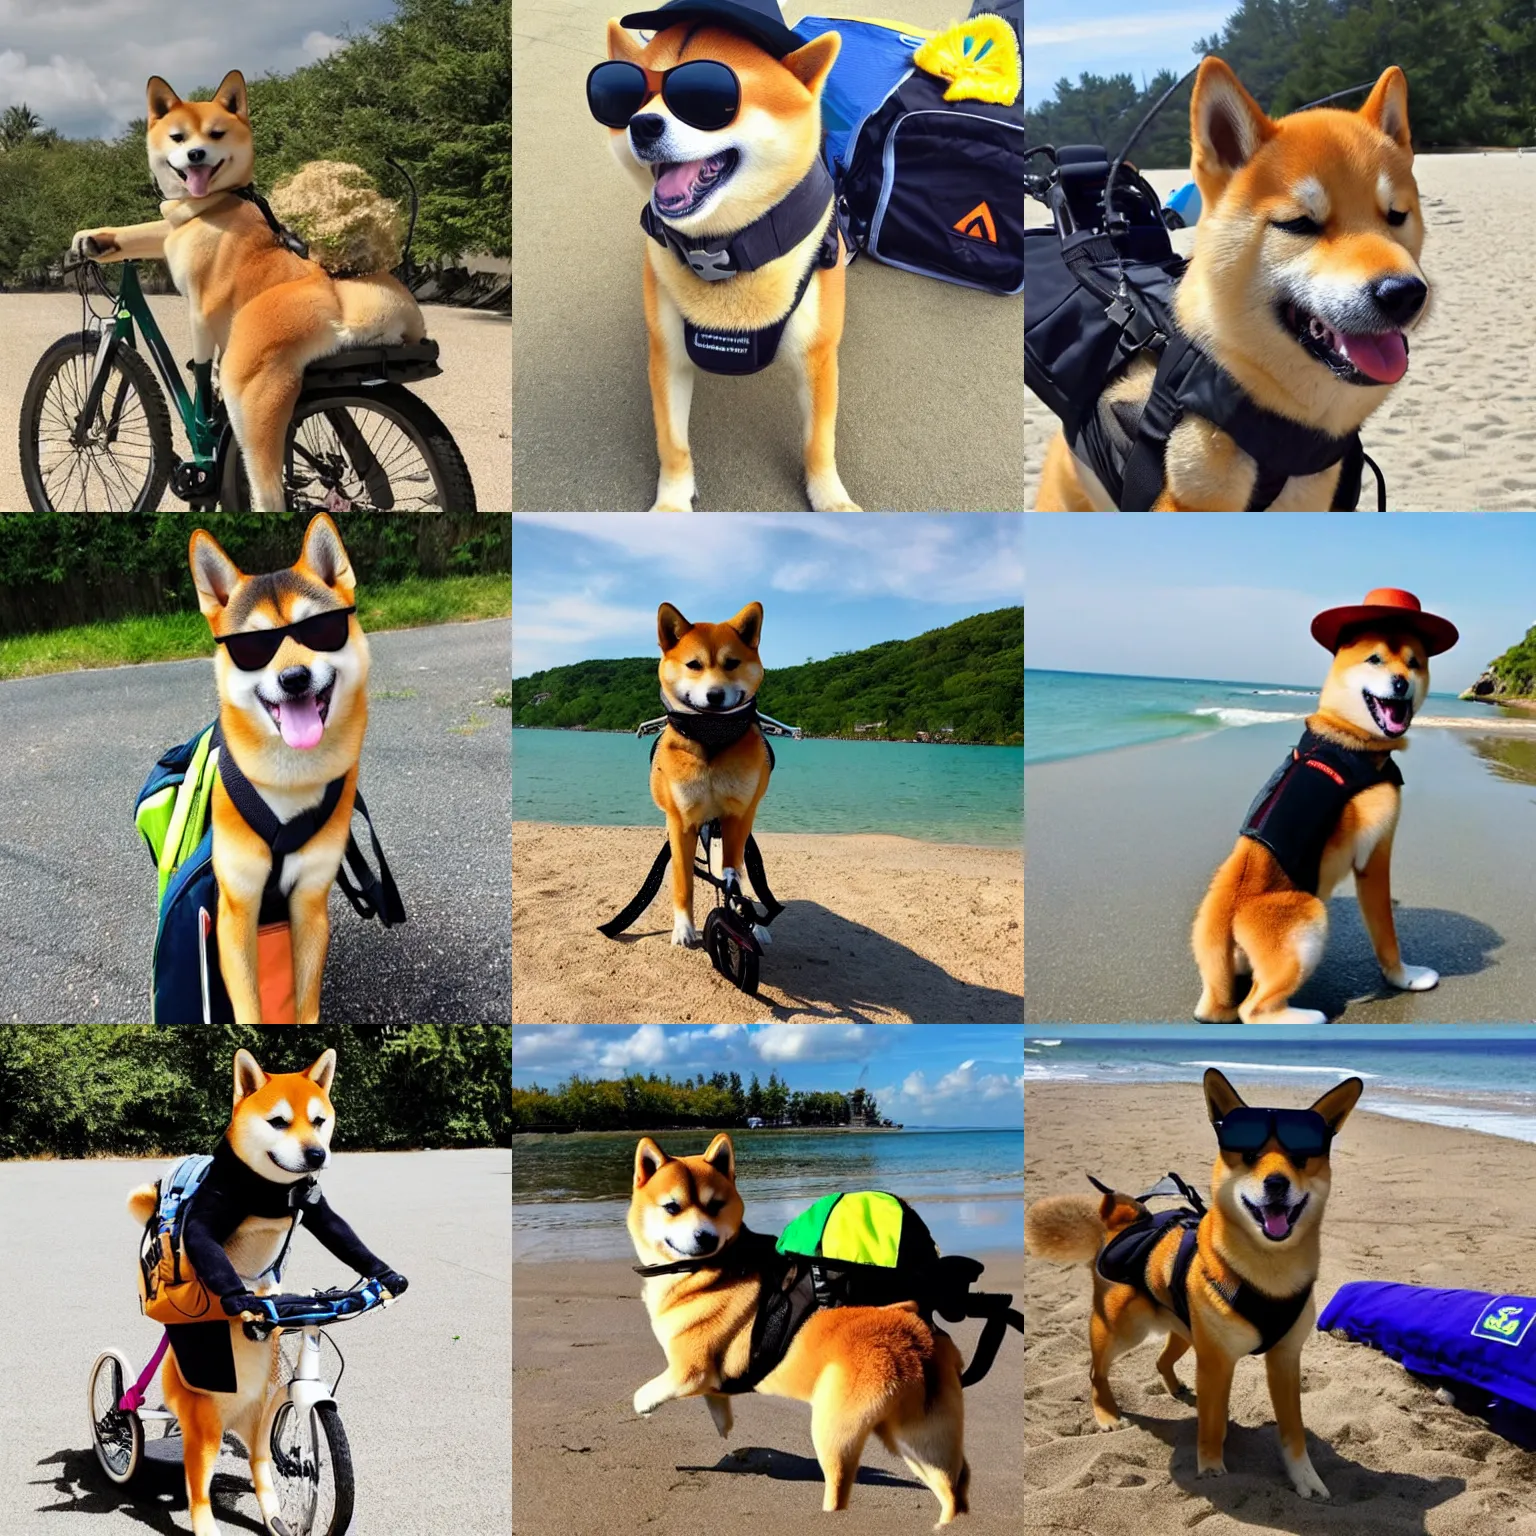 Prompt: A photo of a Shiba Inu dog with a backpack riding a bike. It is wearing sunglasses and a beach hat